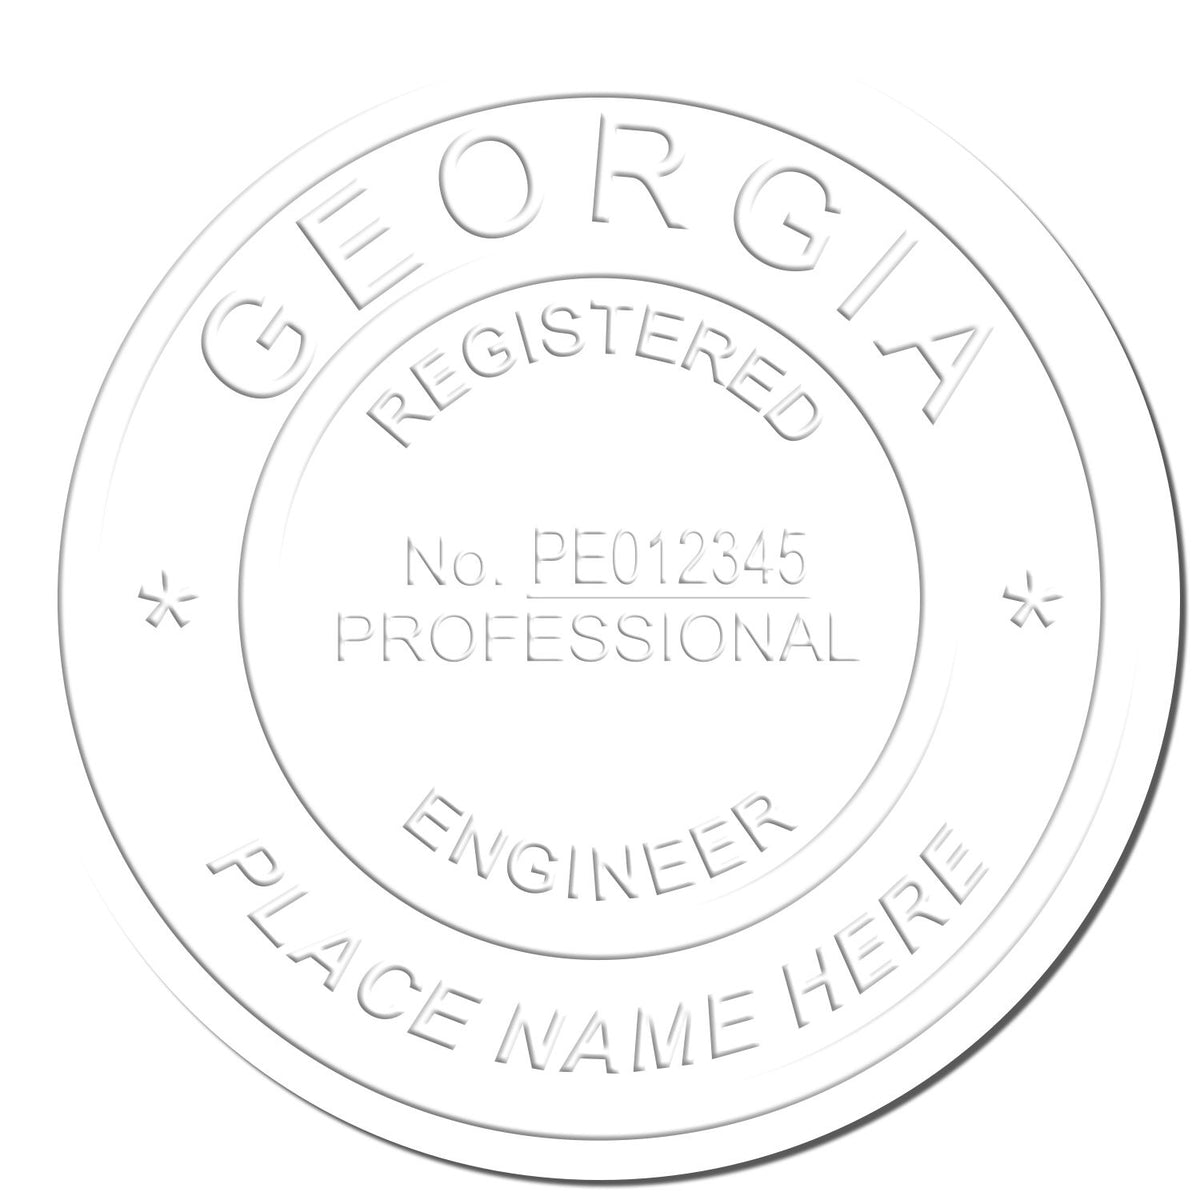 The Soft Georgia Professional Engineer Seal stamp impression comes to life with a crisp, detailed photo on paper - showcasing true professional quality.